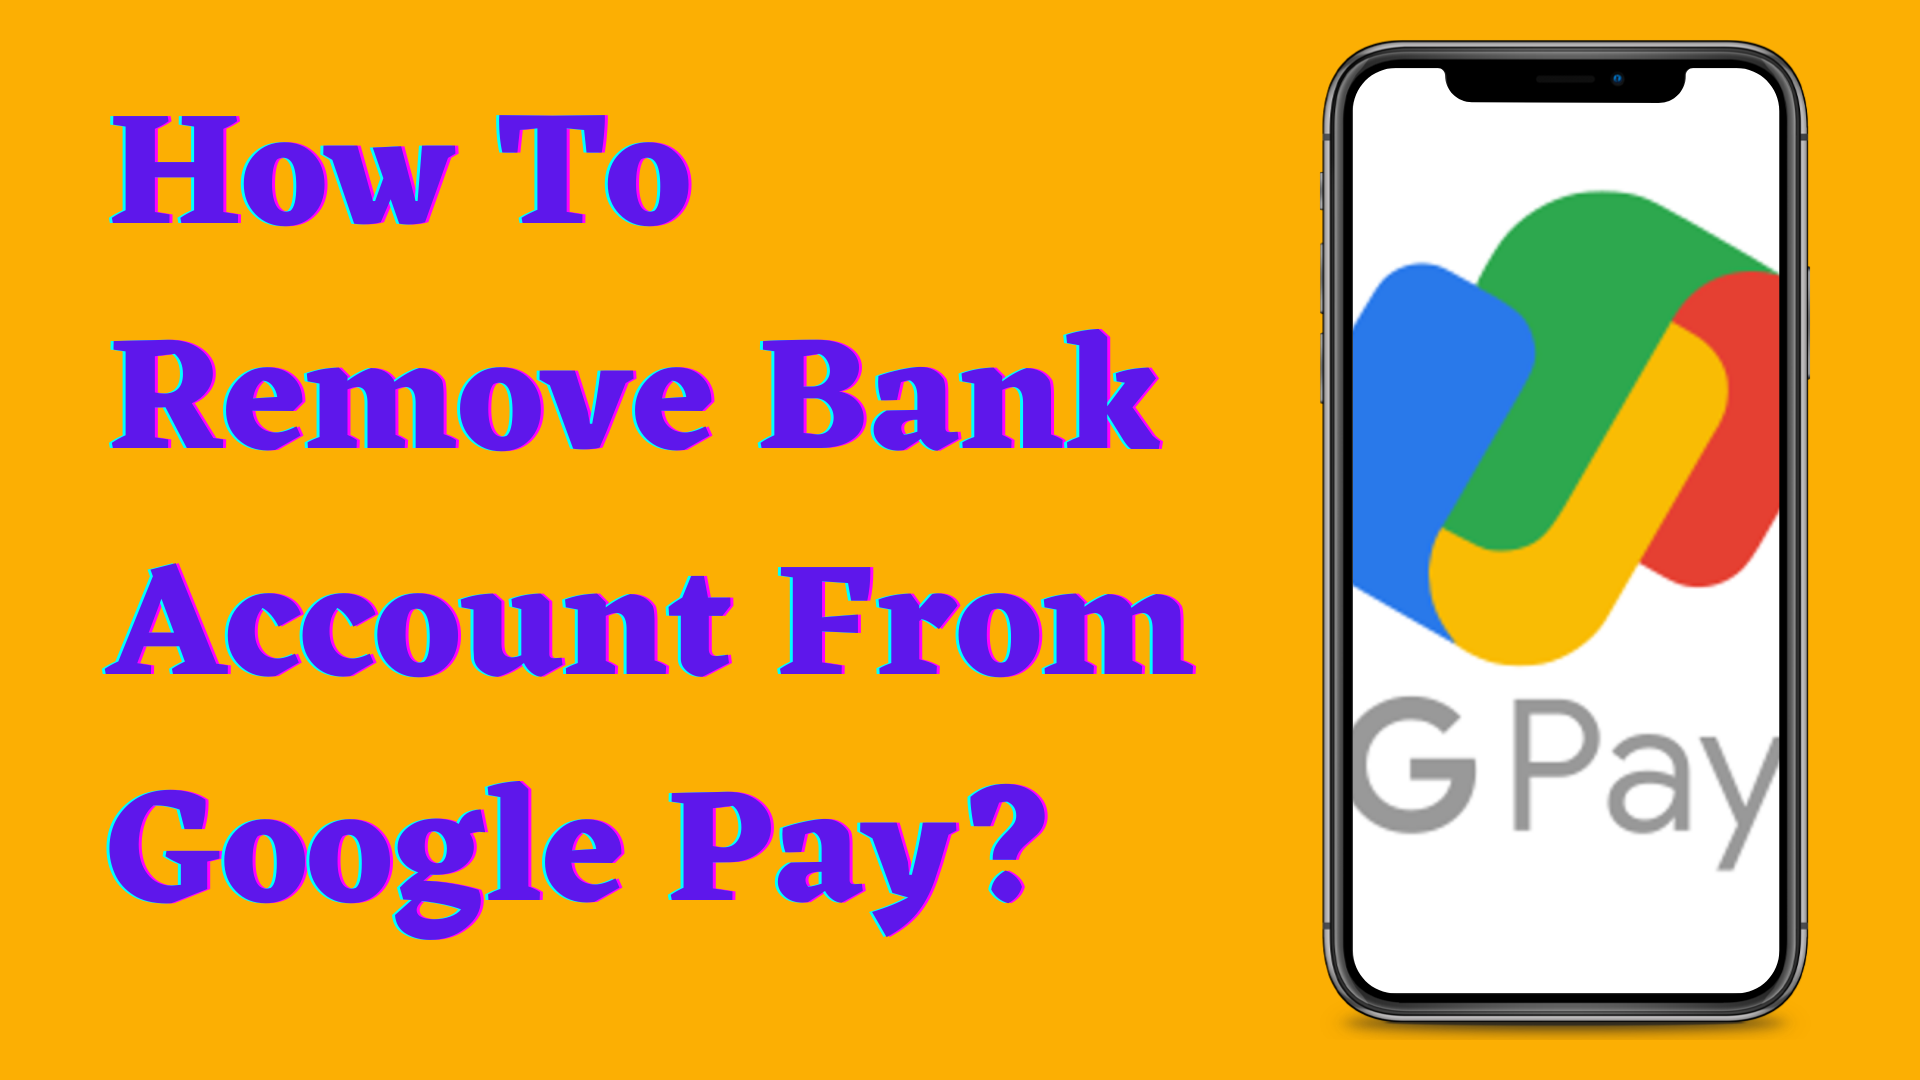 How To Remove Bank Account From Google Pay - Unlink or Delete